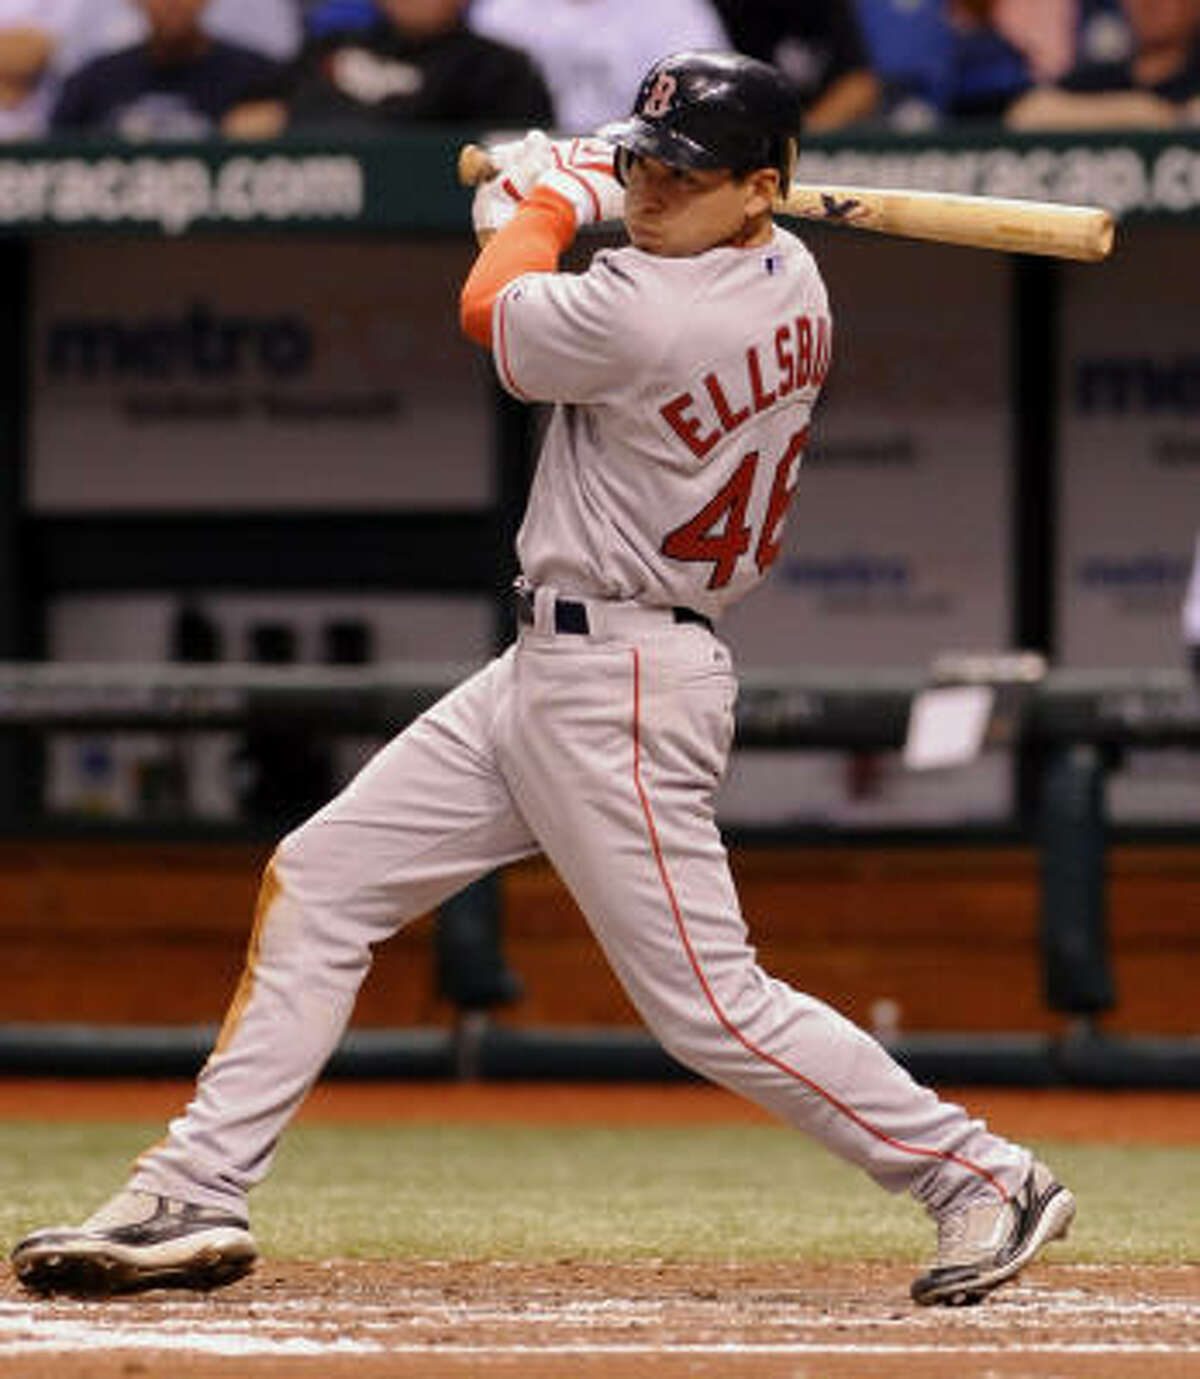 Jacoby Ellsbury, outfield, Red Sox: 2008 salary: $406,000